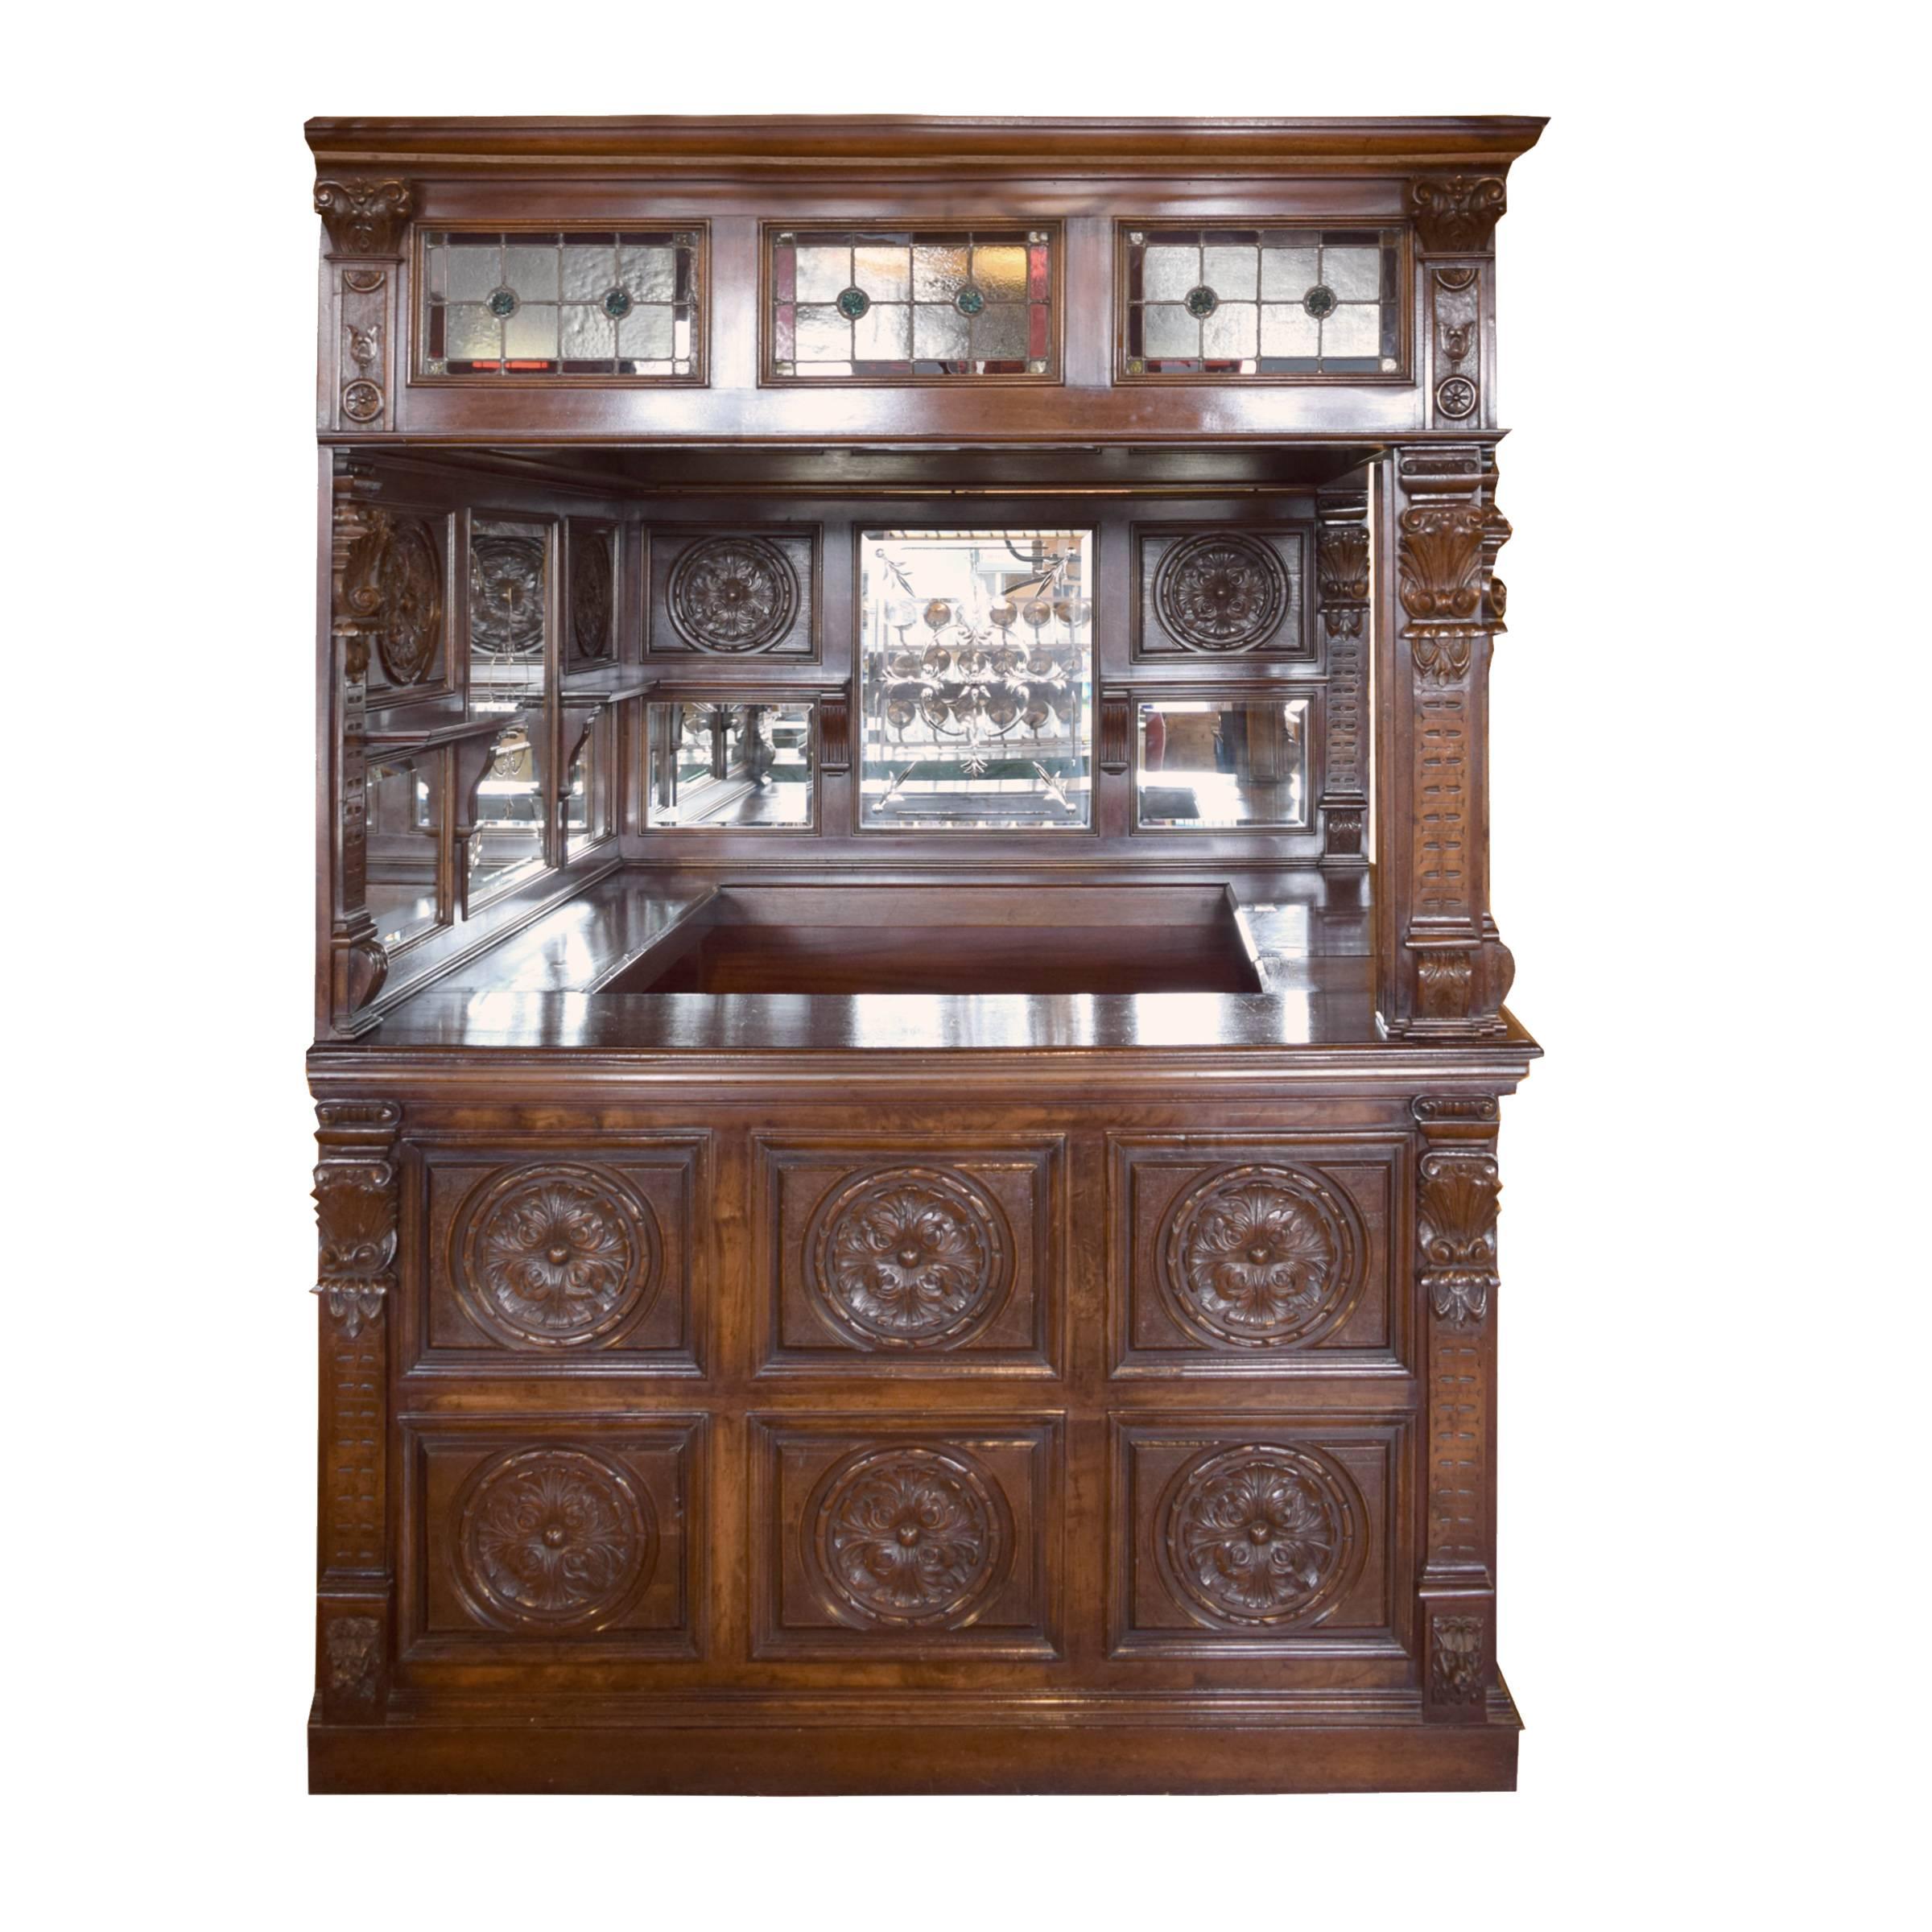 A highly decorated English wood bar with carved floral panels, beveled and cut-glass mirrors, stained glass panels along the top, and a stained glass skylight depicting a bird. The interior features two low shelves that extend along two sides, three